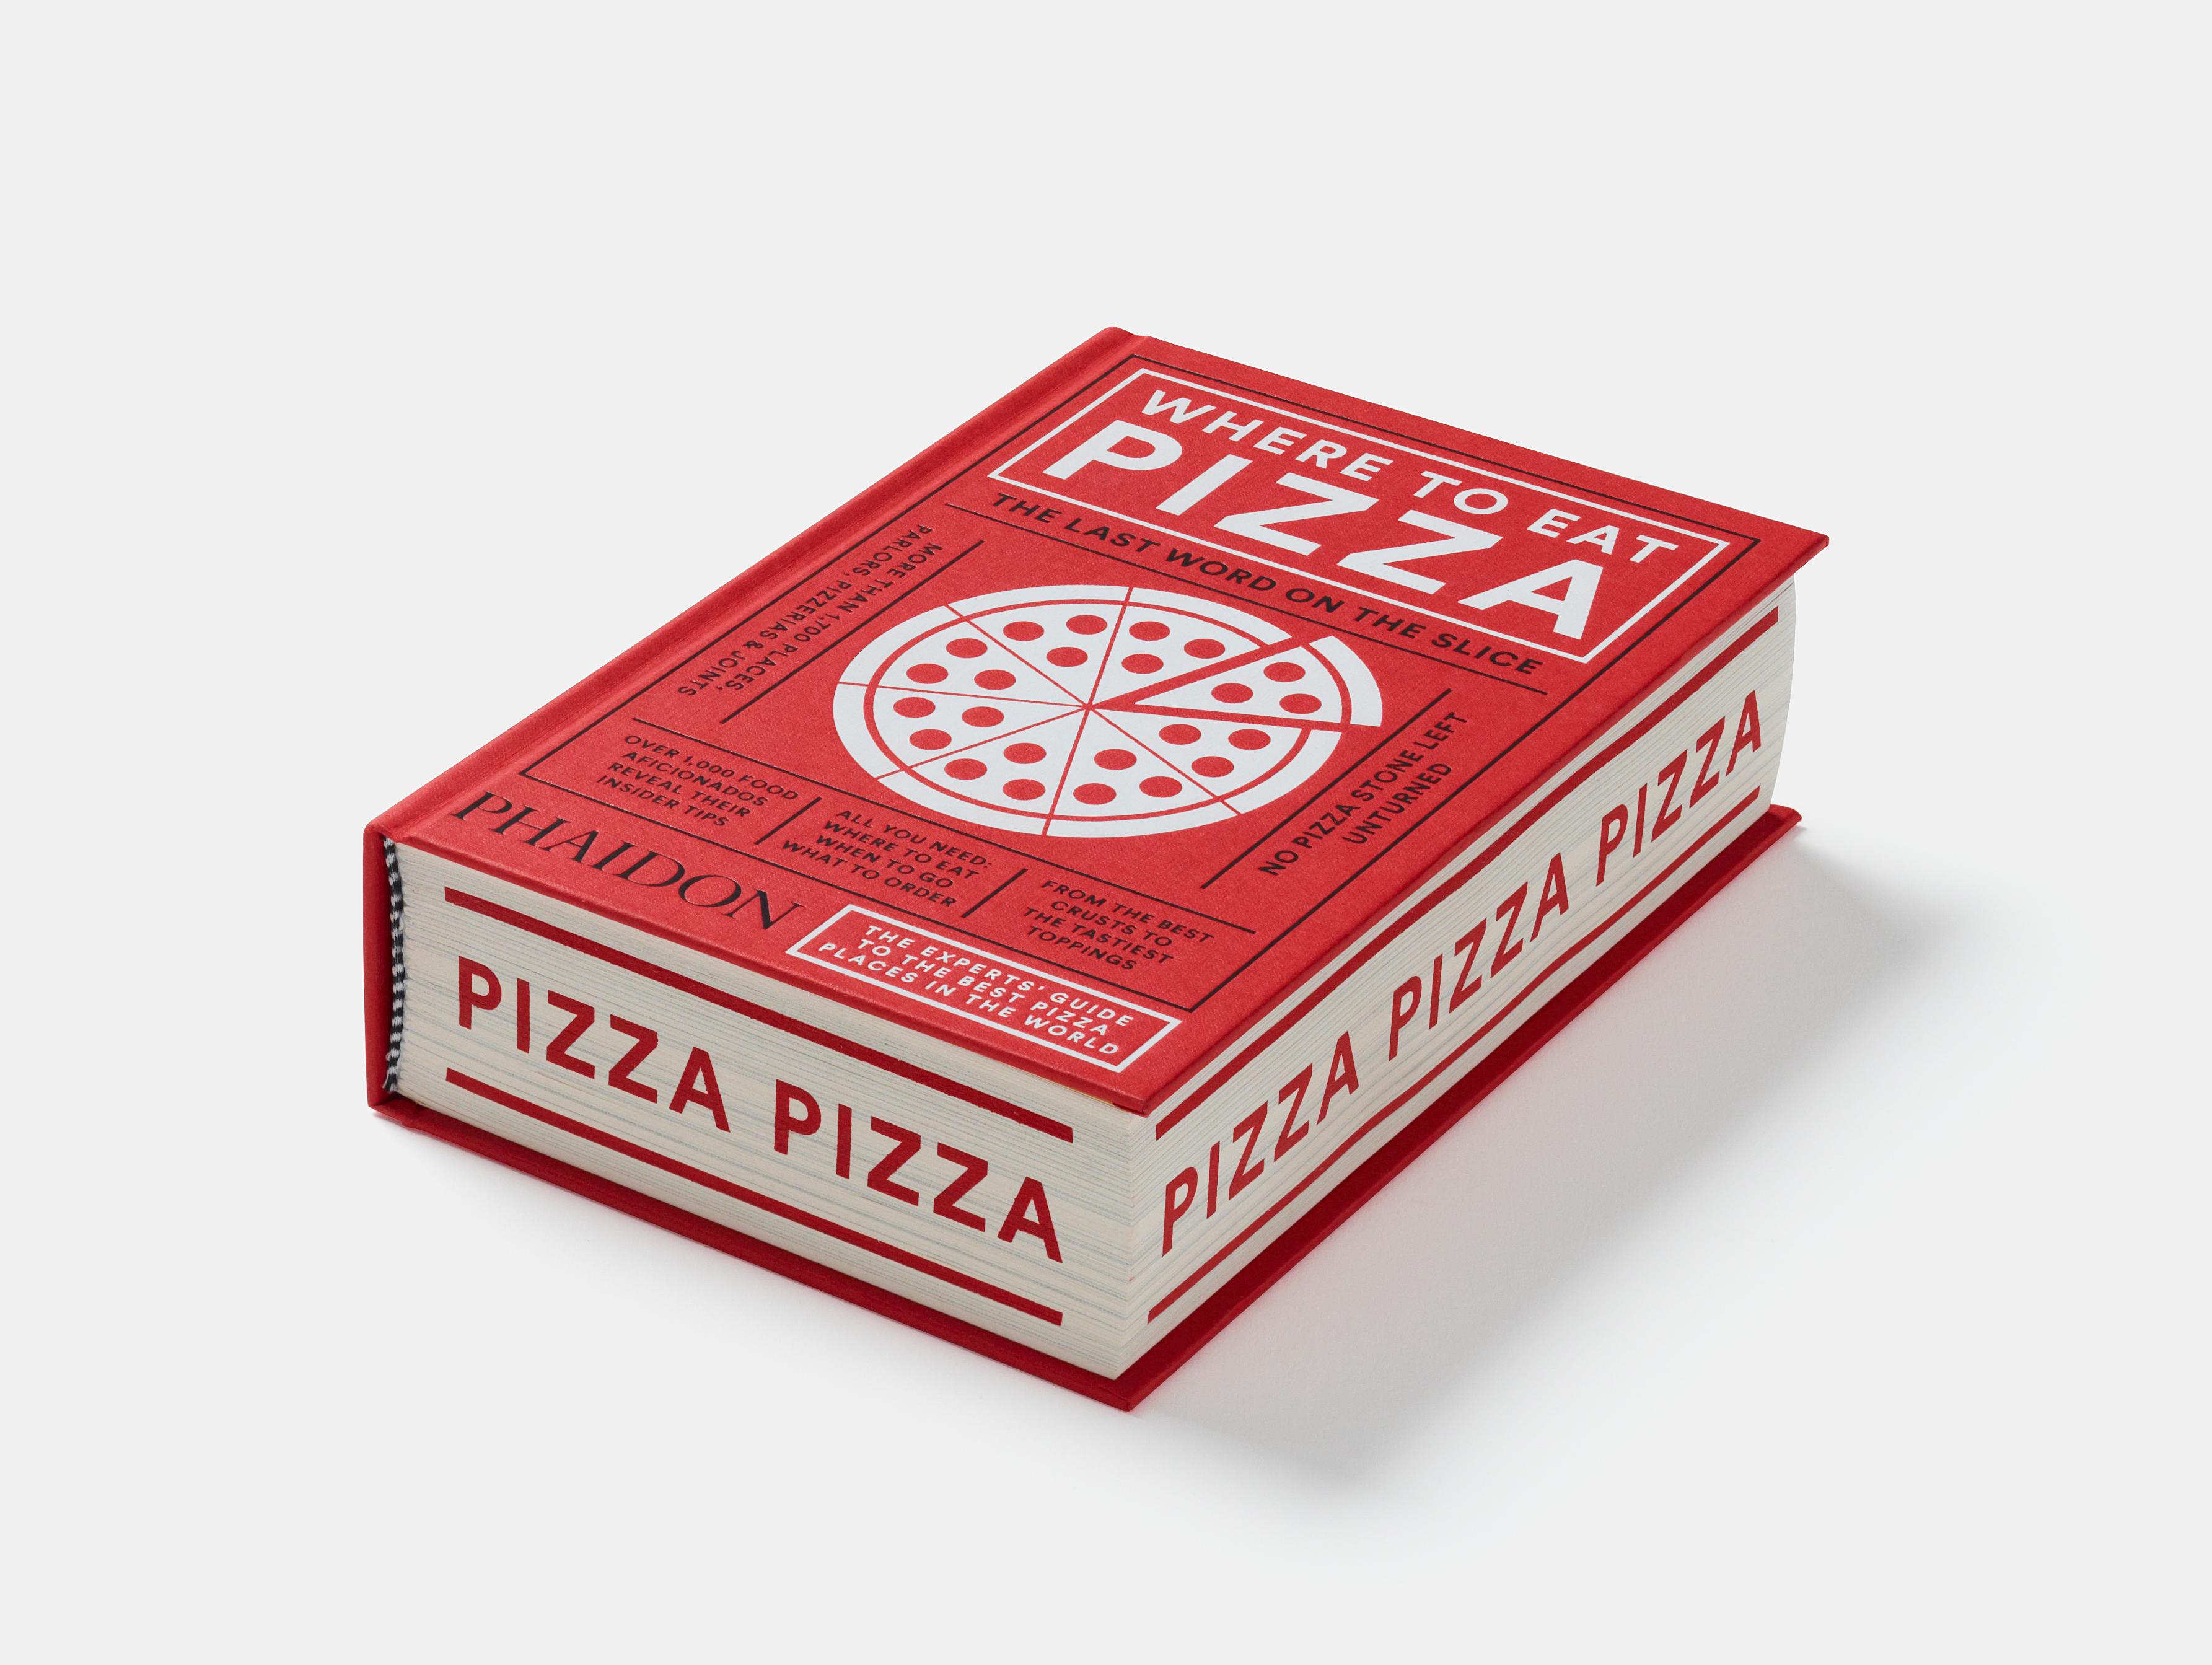 Over 1,000 food experts and aficionados from around the world reveal their insider tips on finding a perfect slice of pizza

From the publishers of the bestselling Where Chefs Eat comes the next food-guide sensation on the most popular dish -